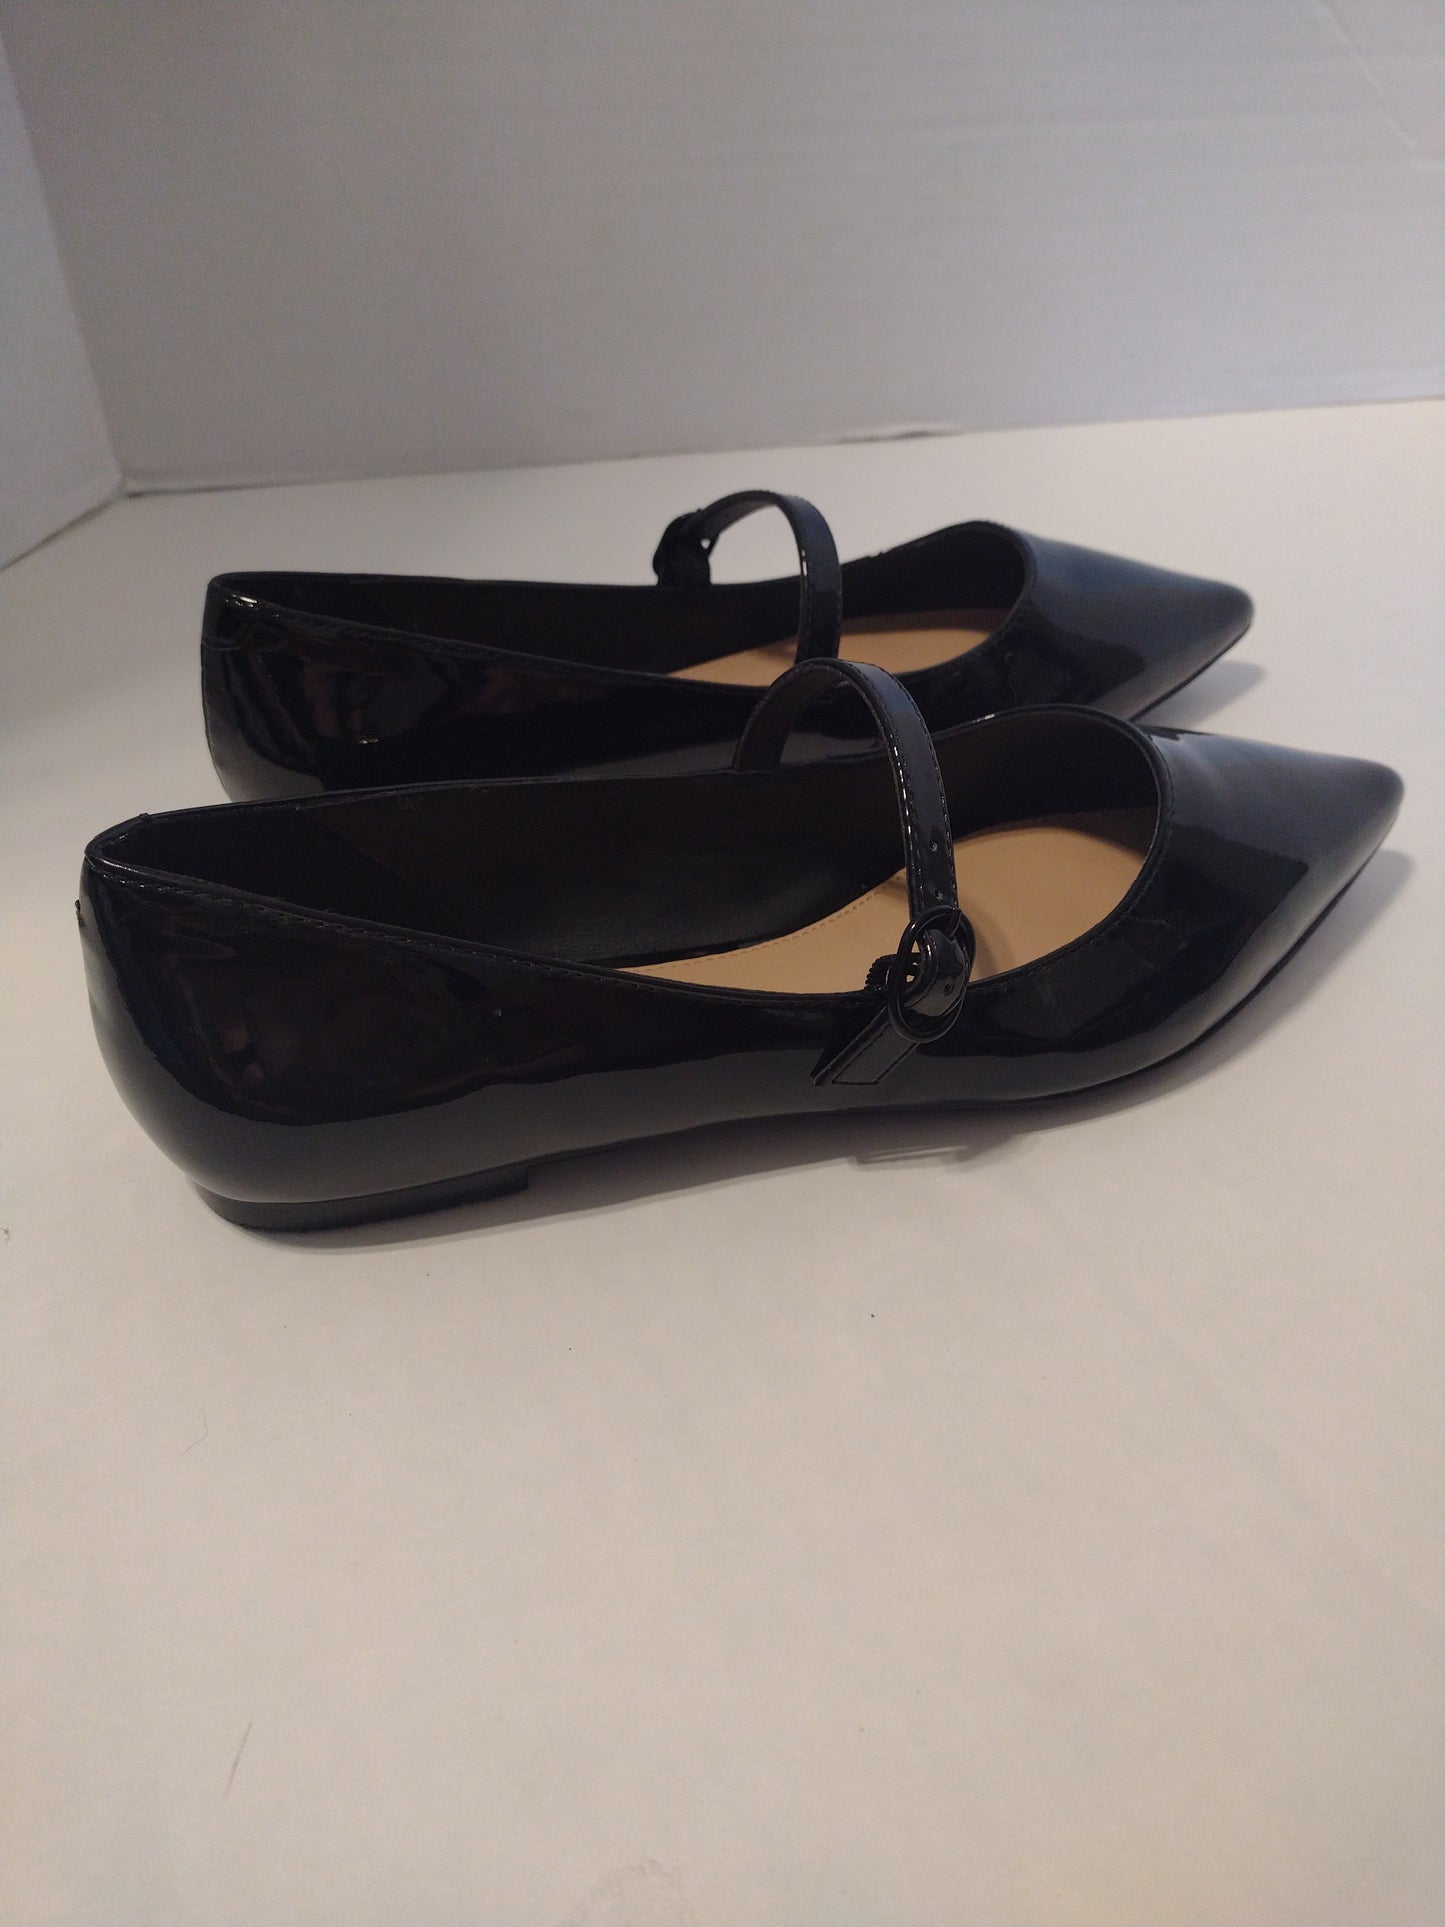 Shoes Flats Ballet By Just Fab  Size: 6.5